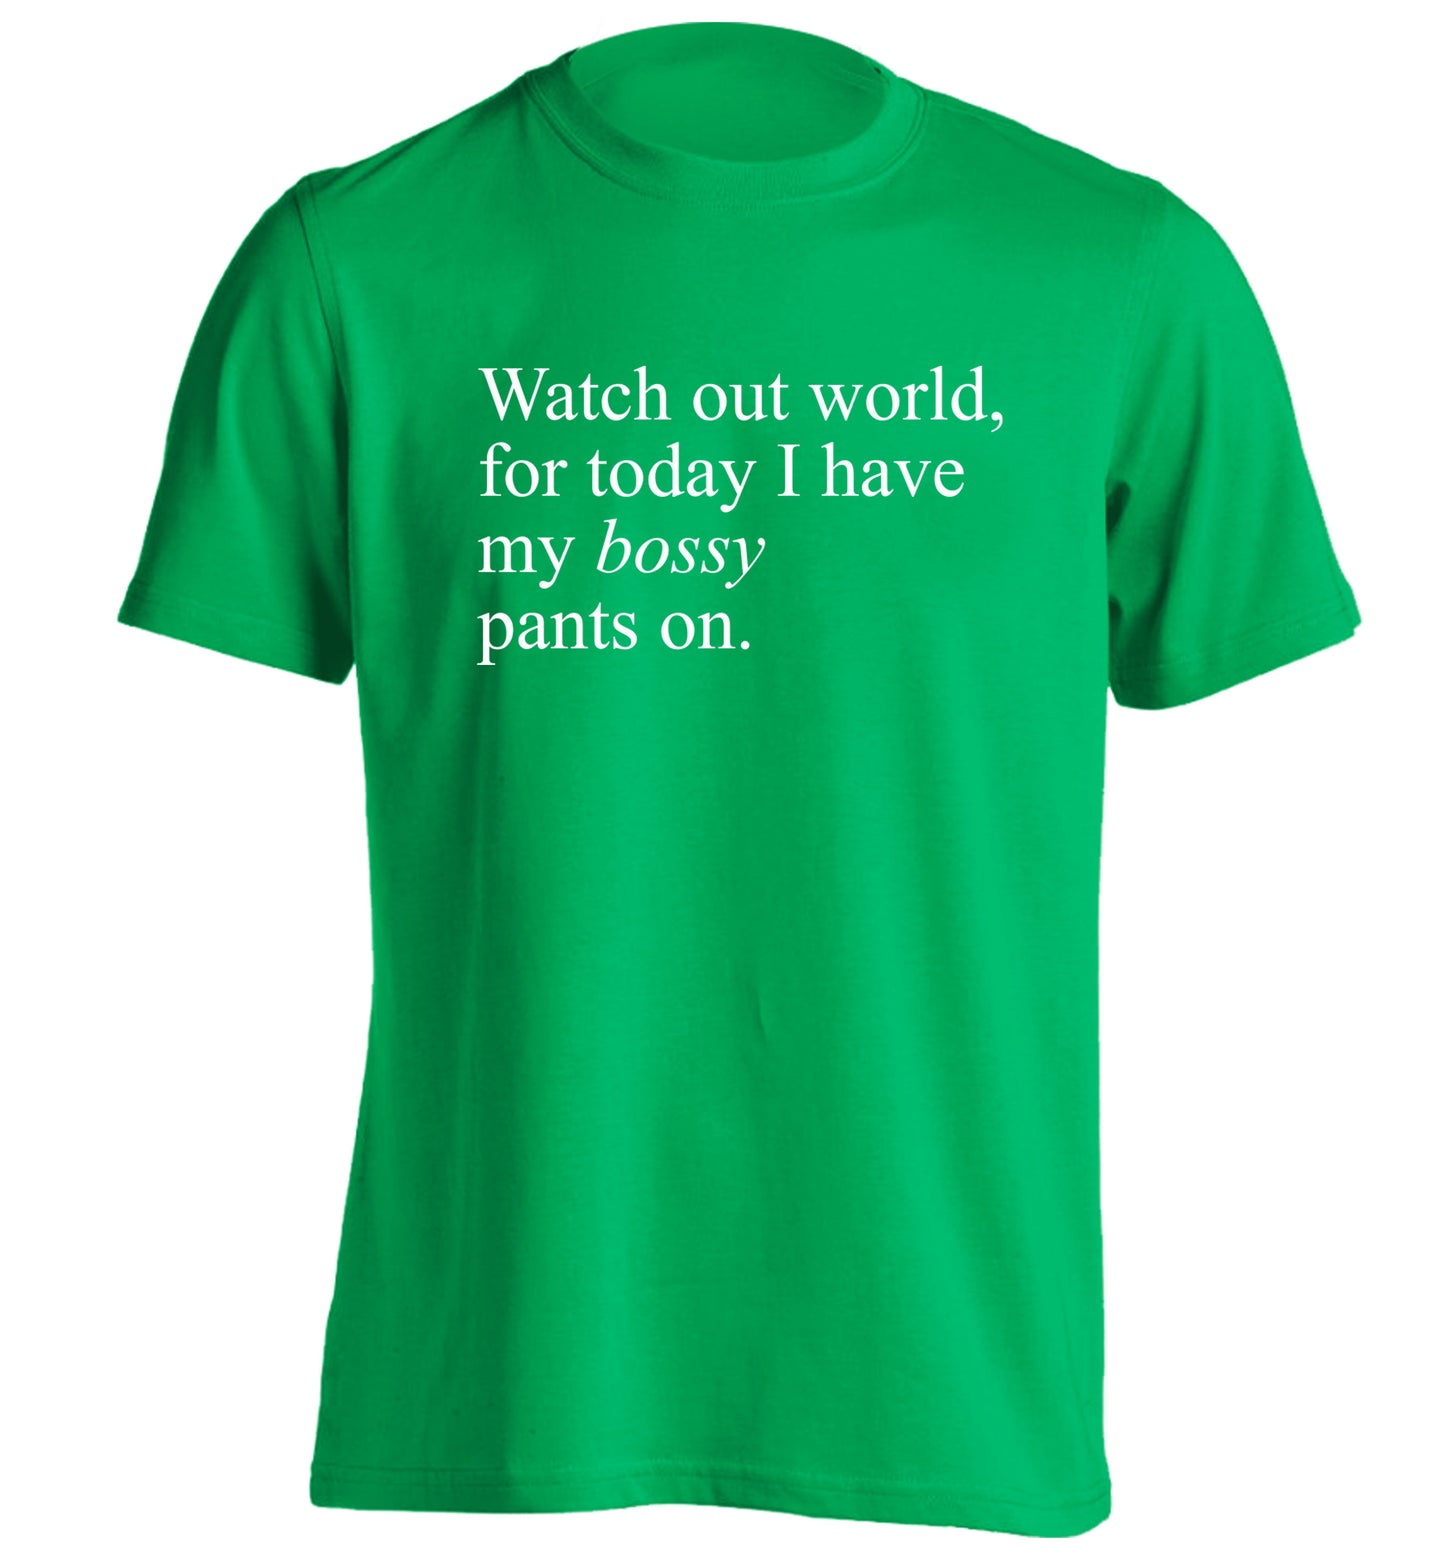 Watch out world, for today I have my bossy pants on adults unisex green Tshirt 2XL